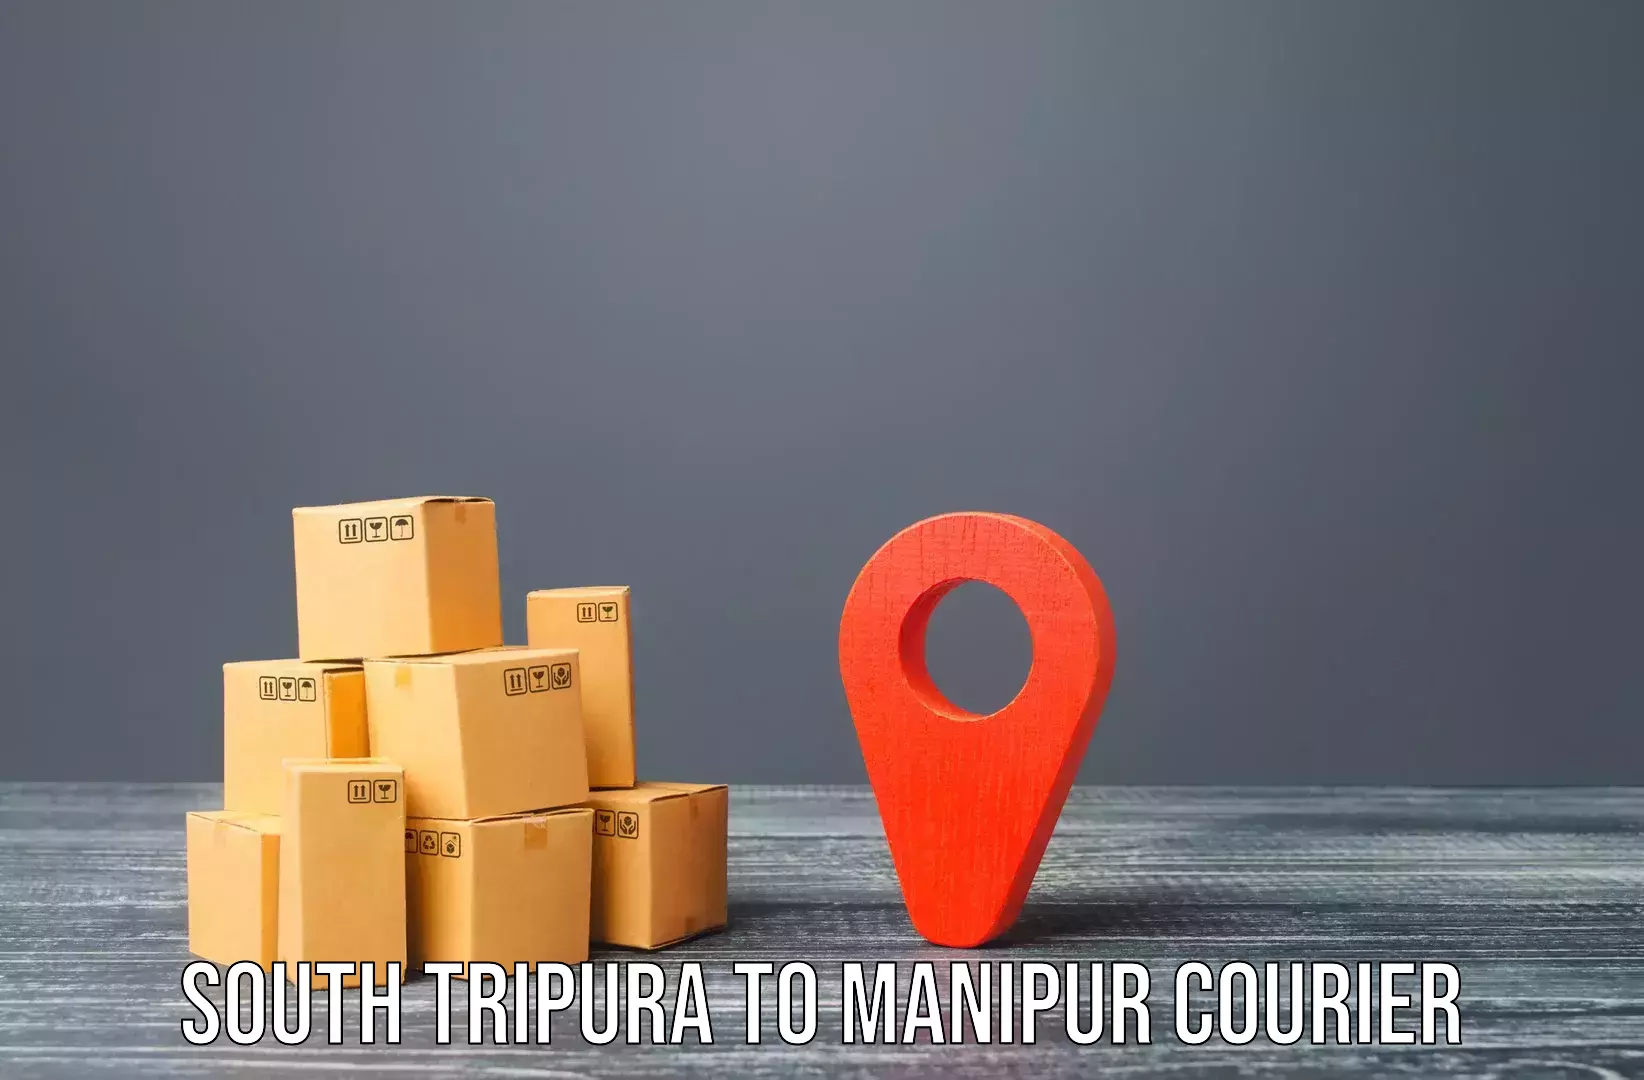 Quality moving and storage South Tripura to Imphal